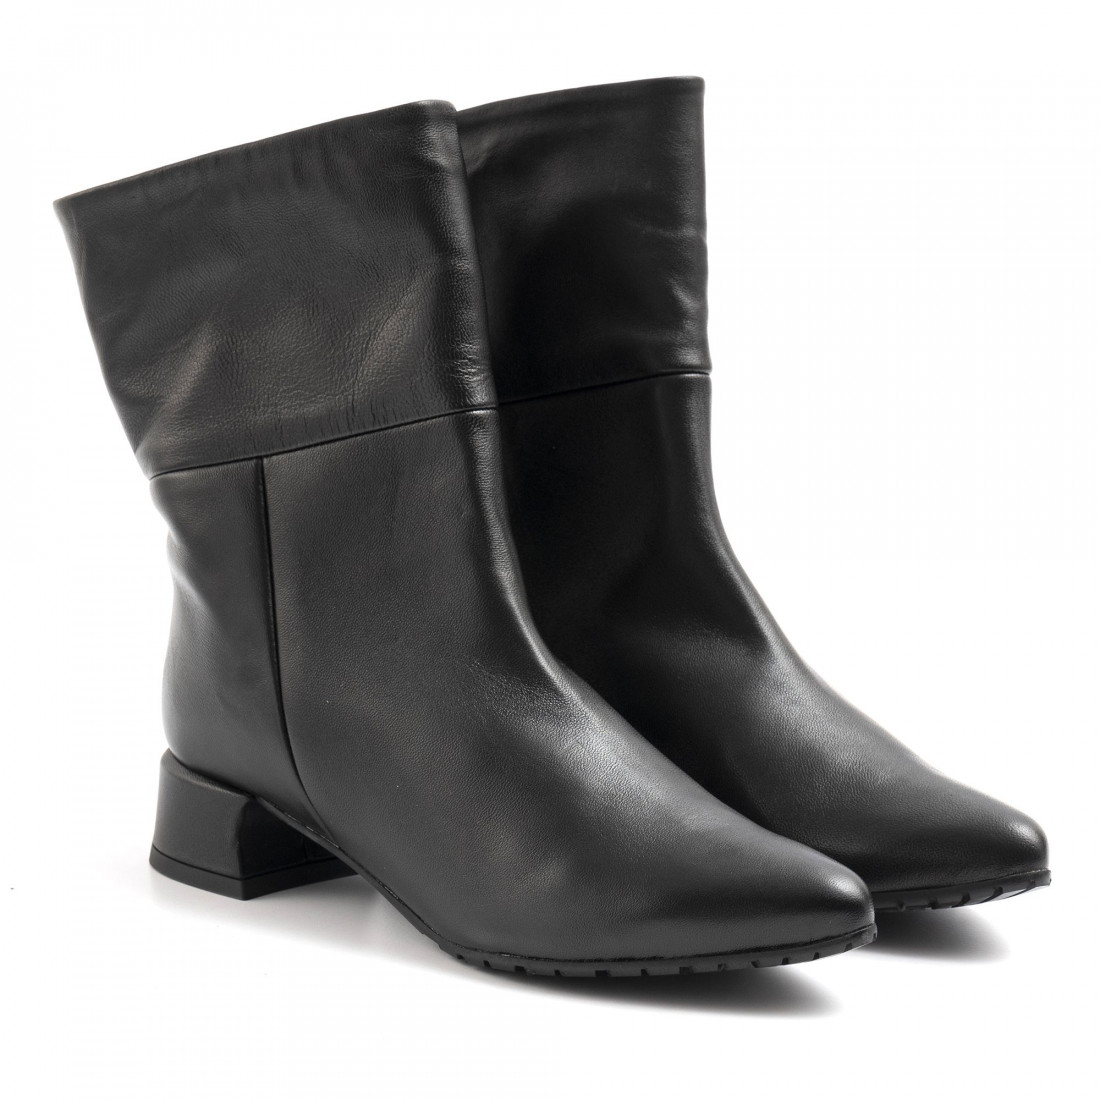 Black leather Startup booties with low heel